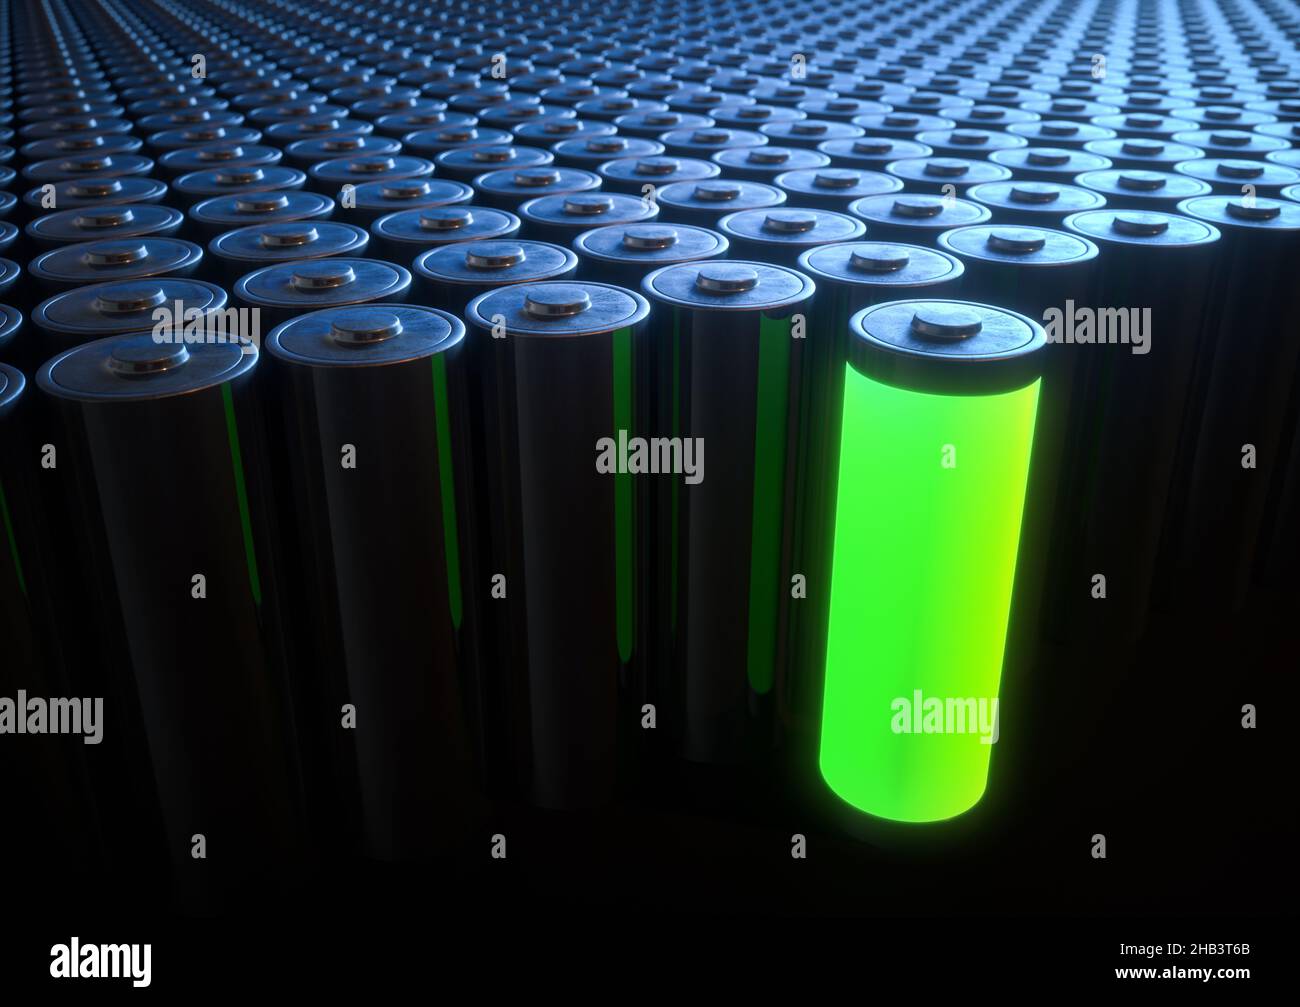 3D illustration, concept image of battery recycling, renewable energy. Stock Photo